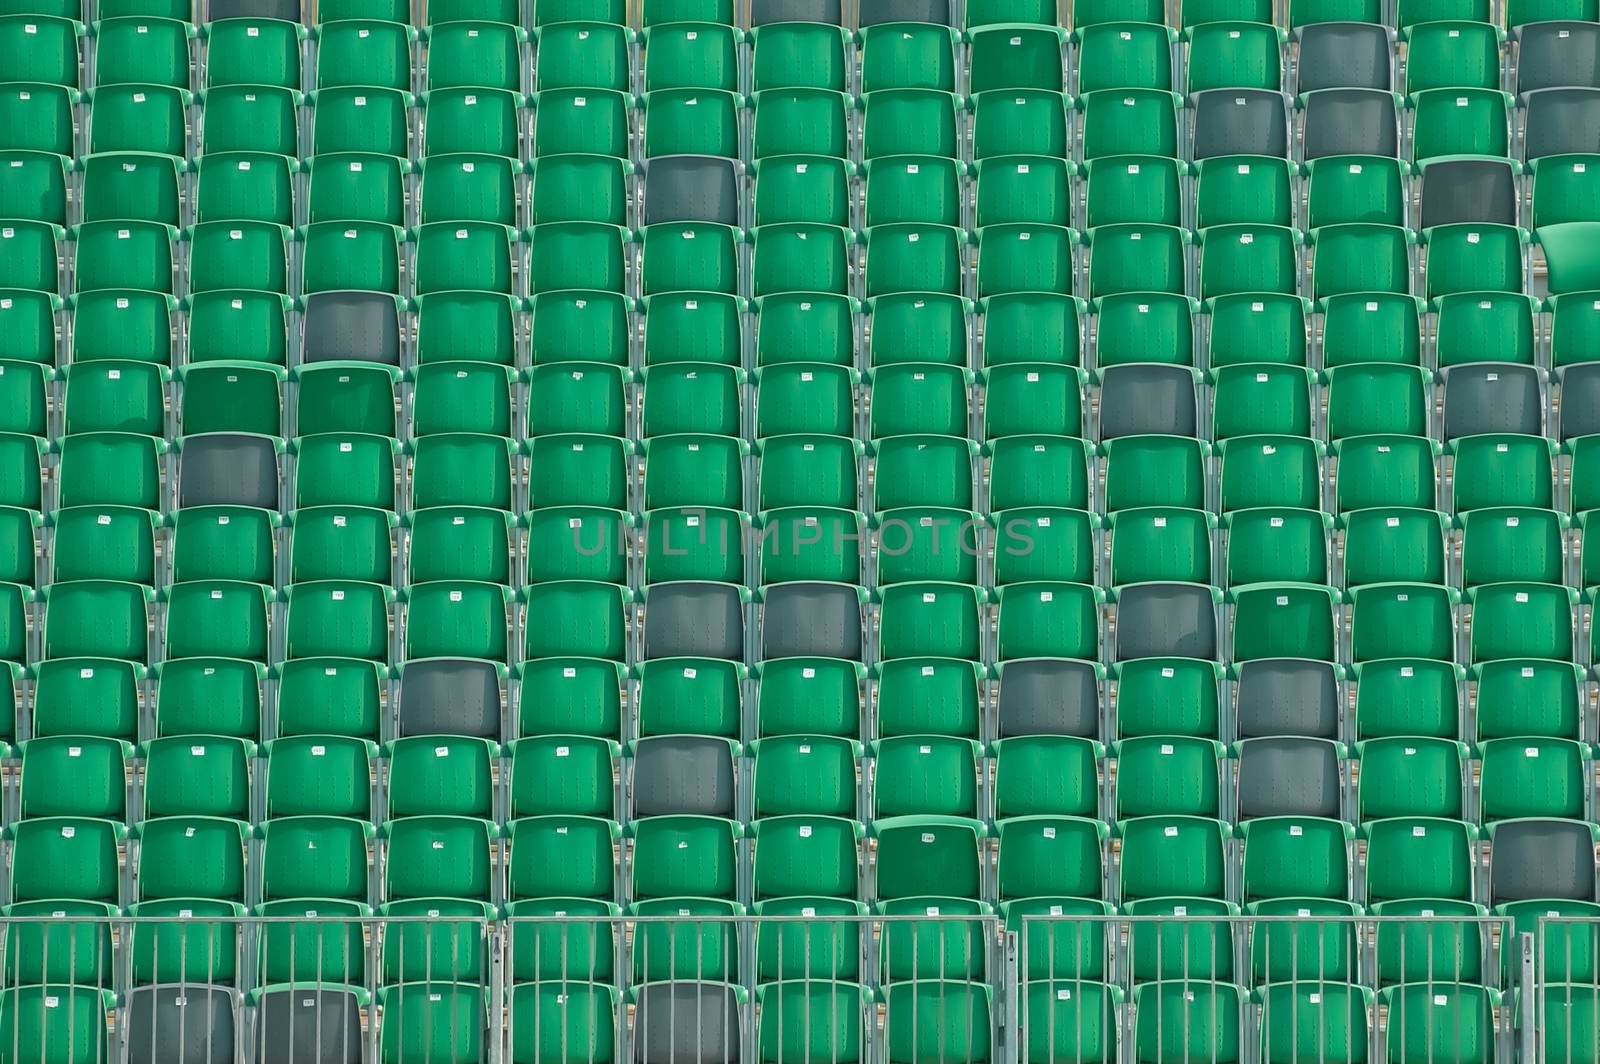 rows of empty plastic grandstand seats in an outdoor sporting venue